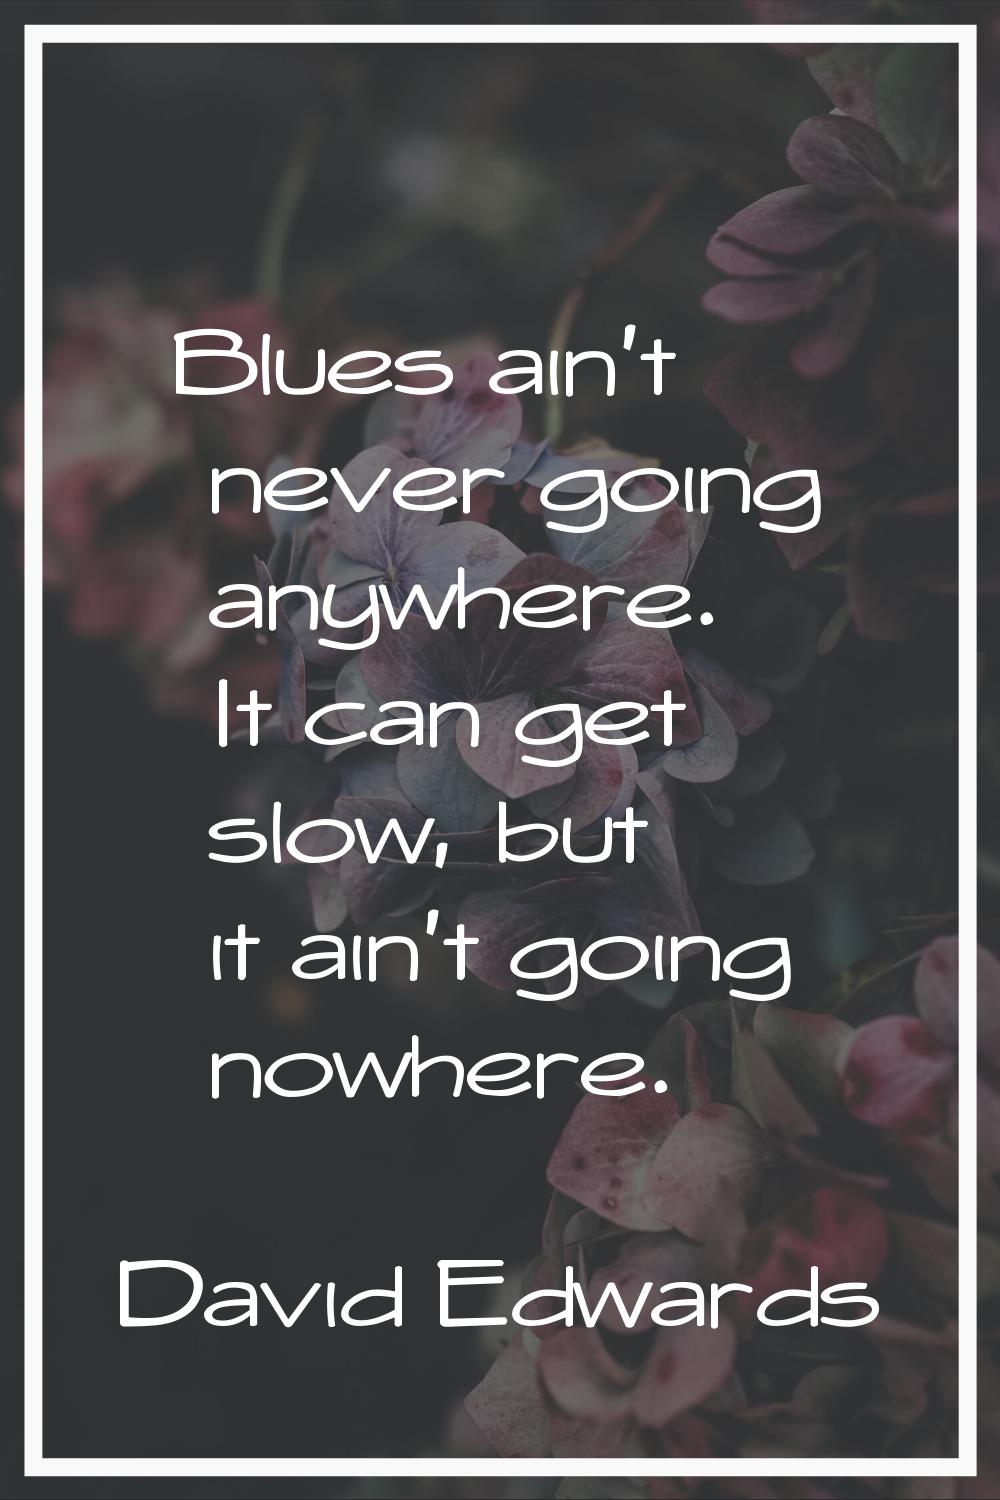 Blues ain't never going anywhere. It can get slow, but it ain't going nowhere.